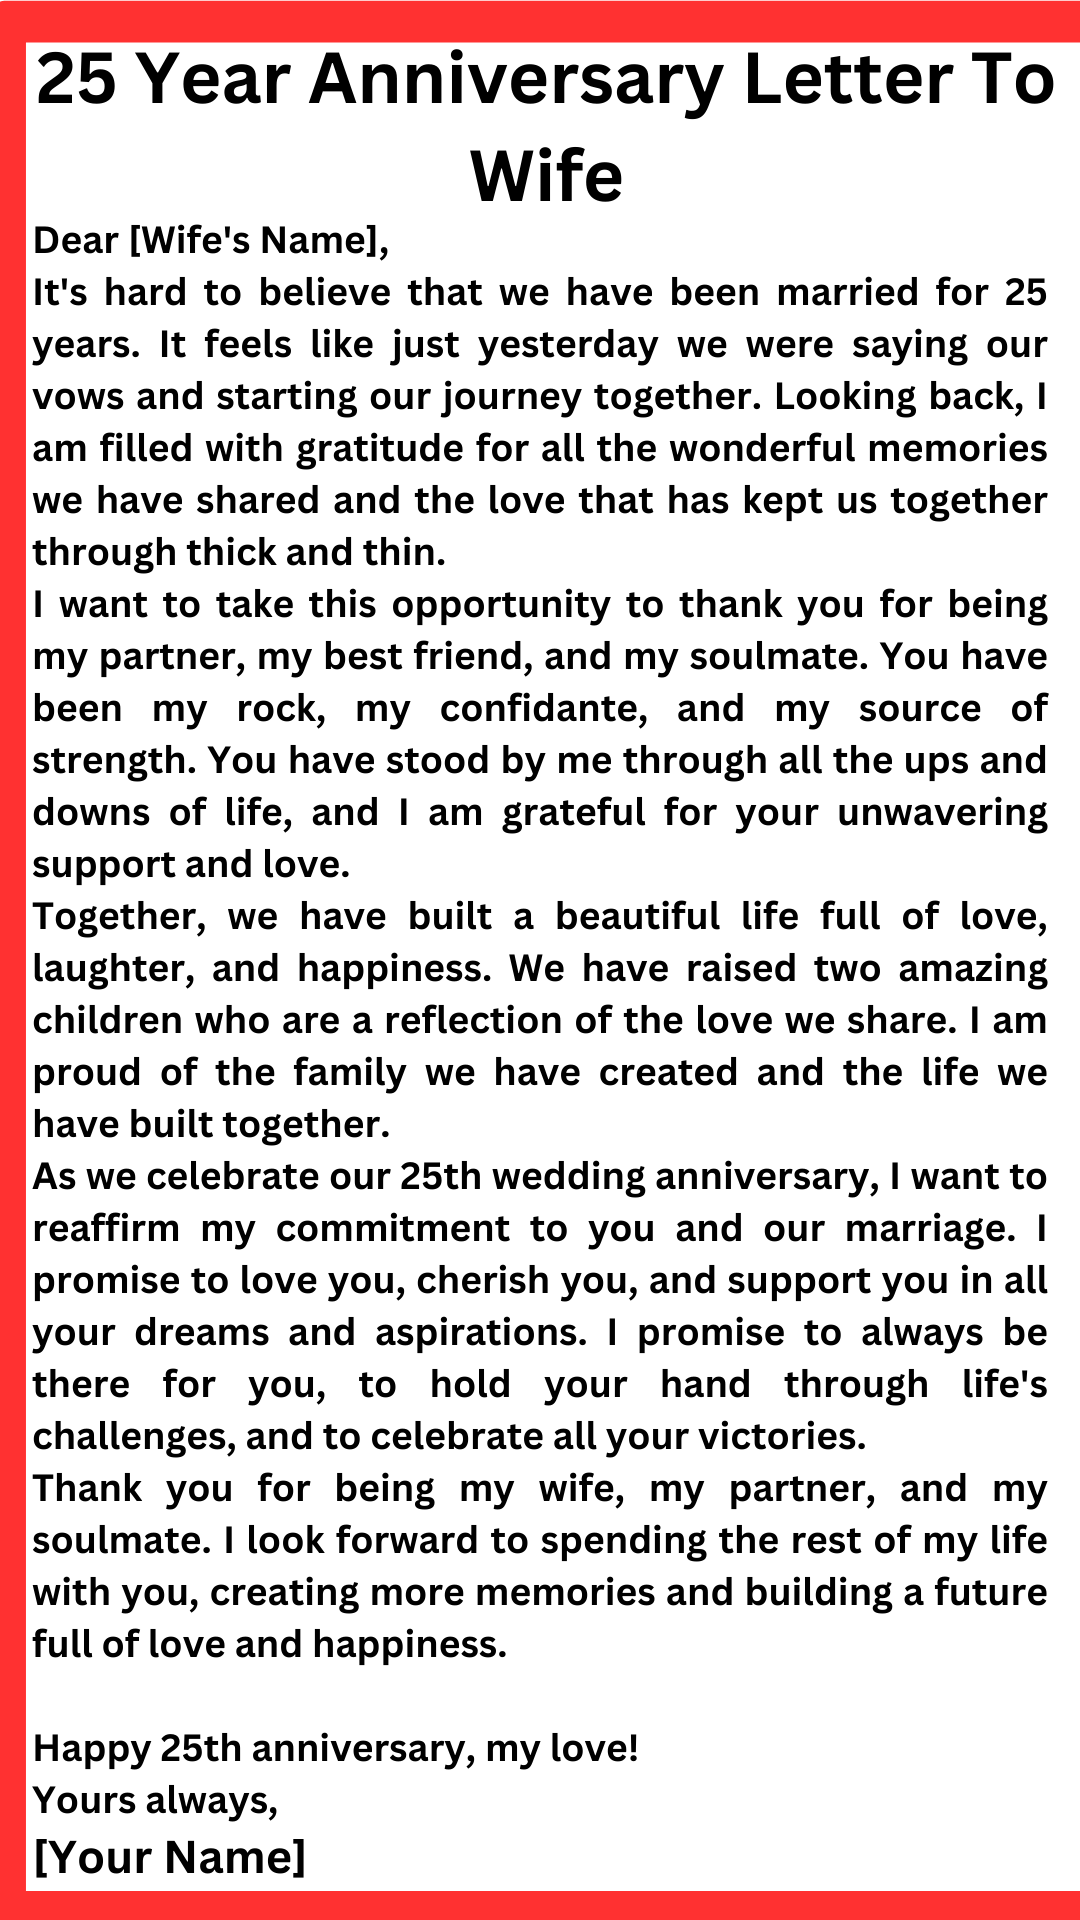 25 Year Anniversary Letter To Wife (10 Samples)